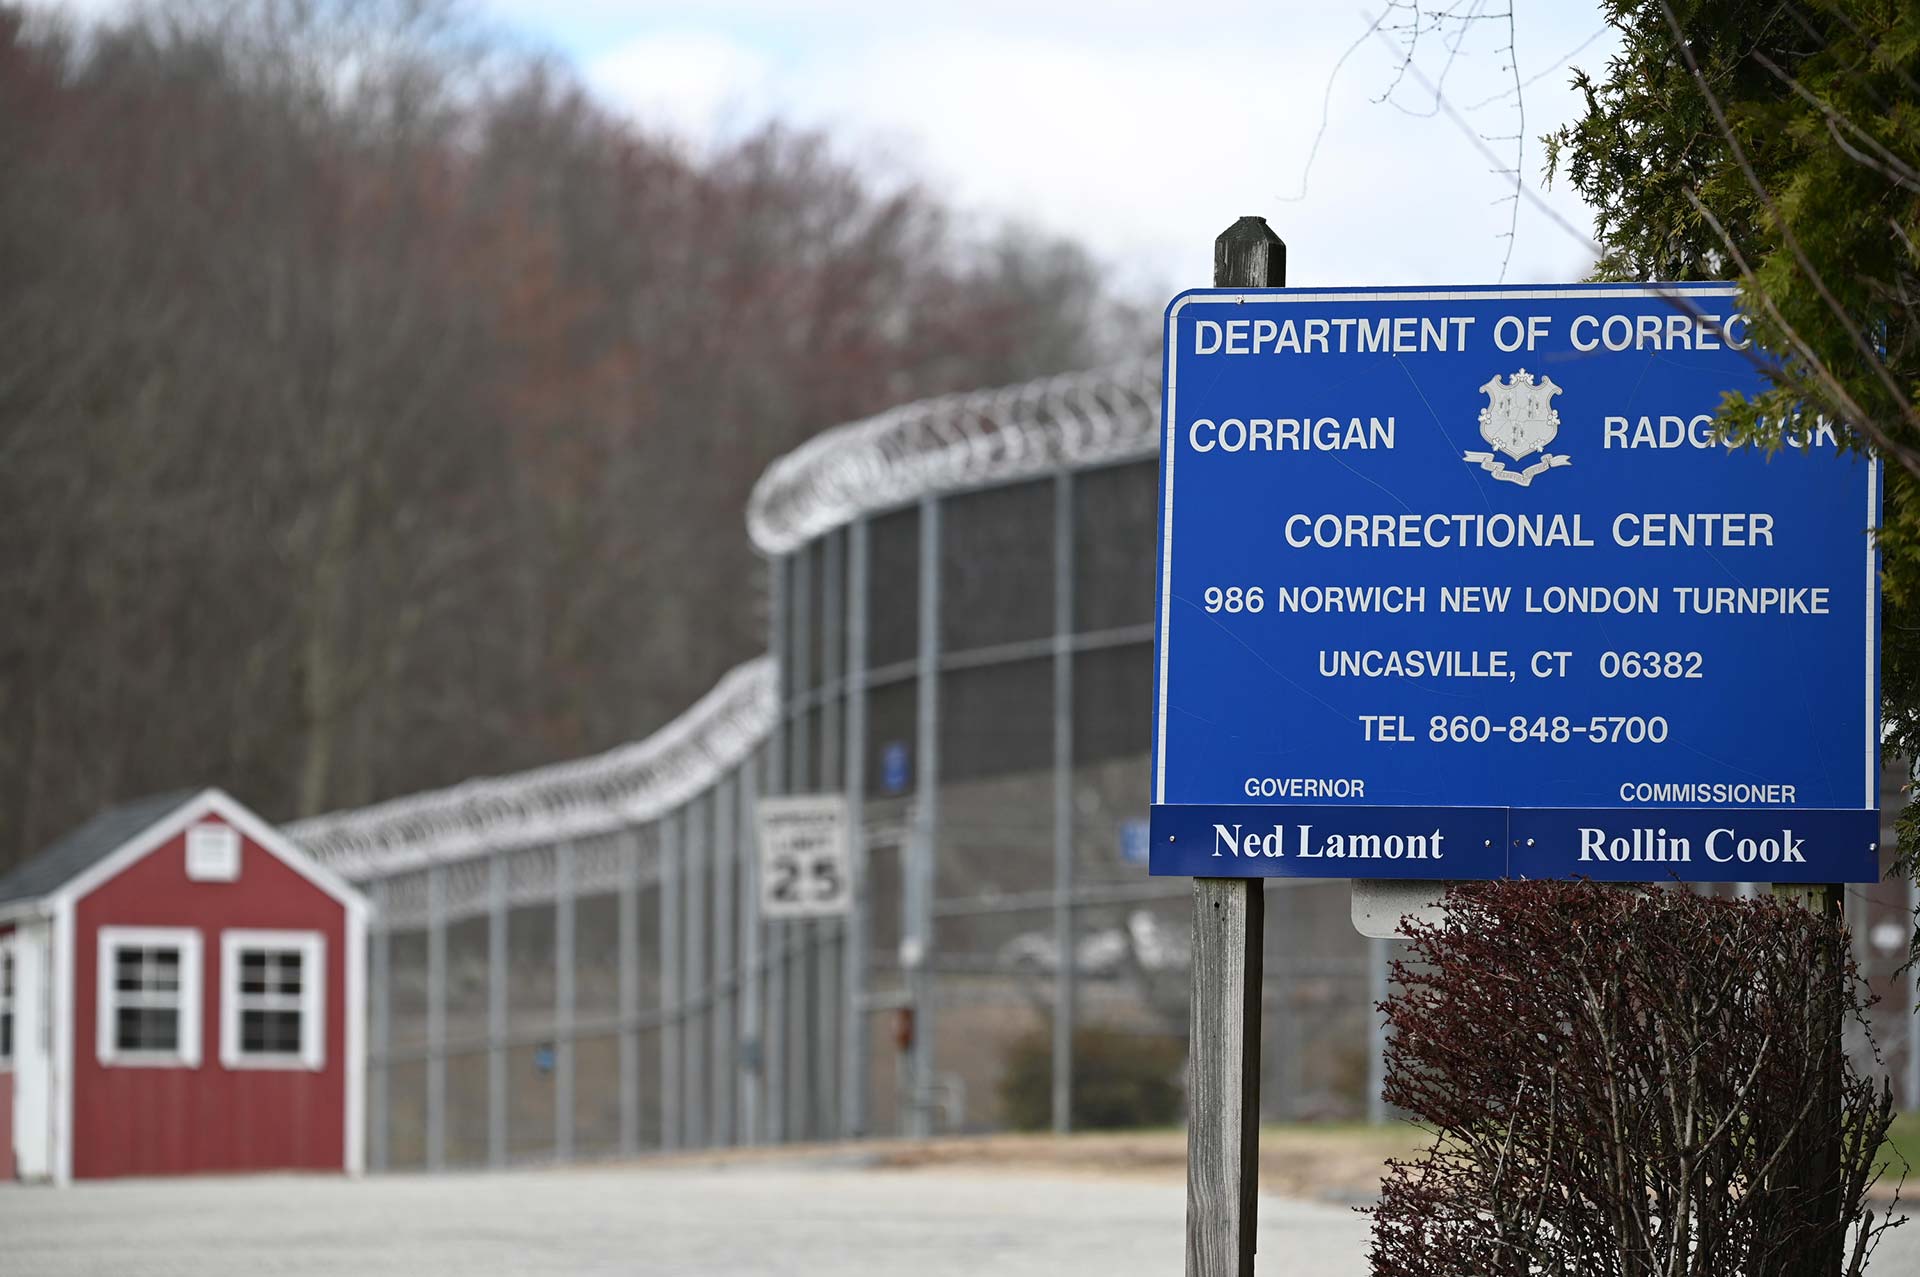 Corrigan-Radgowski Correctional Center in Uncasville on April 1, where multiple inmates and one staff member have tested positive for COVID-19. (Ryan Caron King/Connecticut Public)